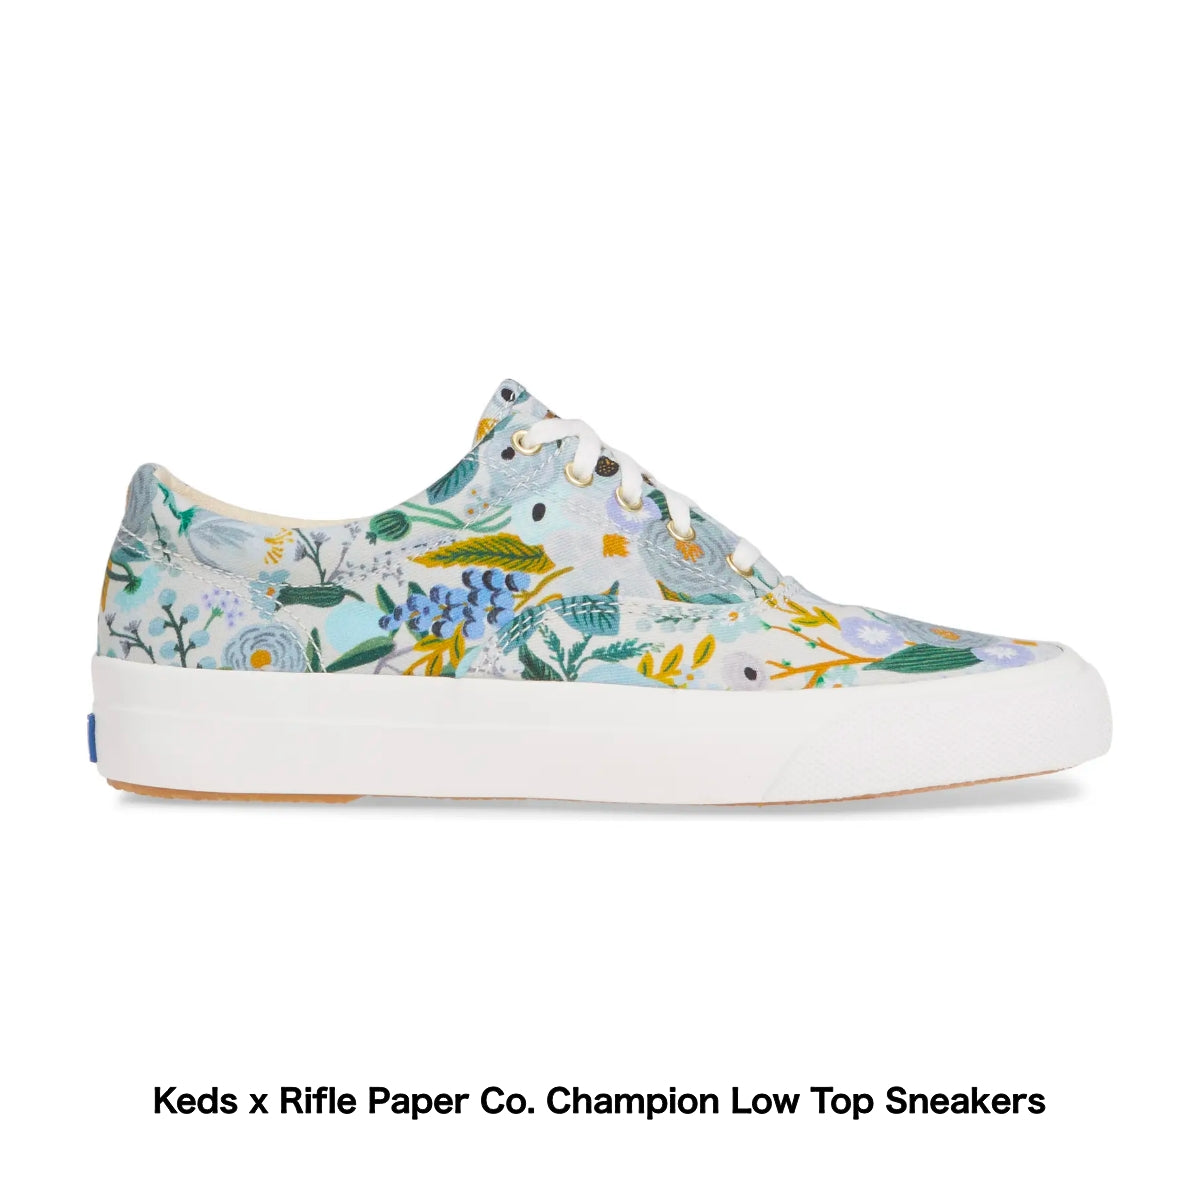 Keds x Rifle Paper Co. Champion Low Top Sneakers - Nordstrom